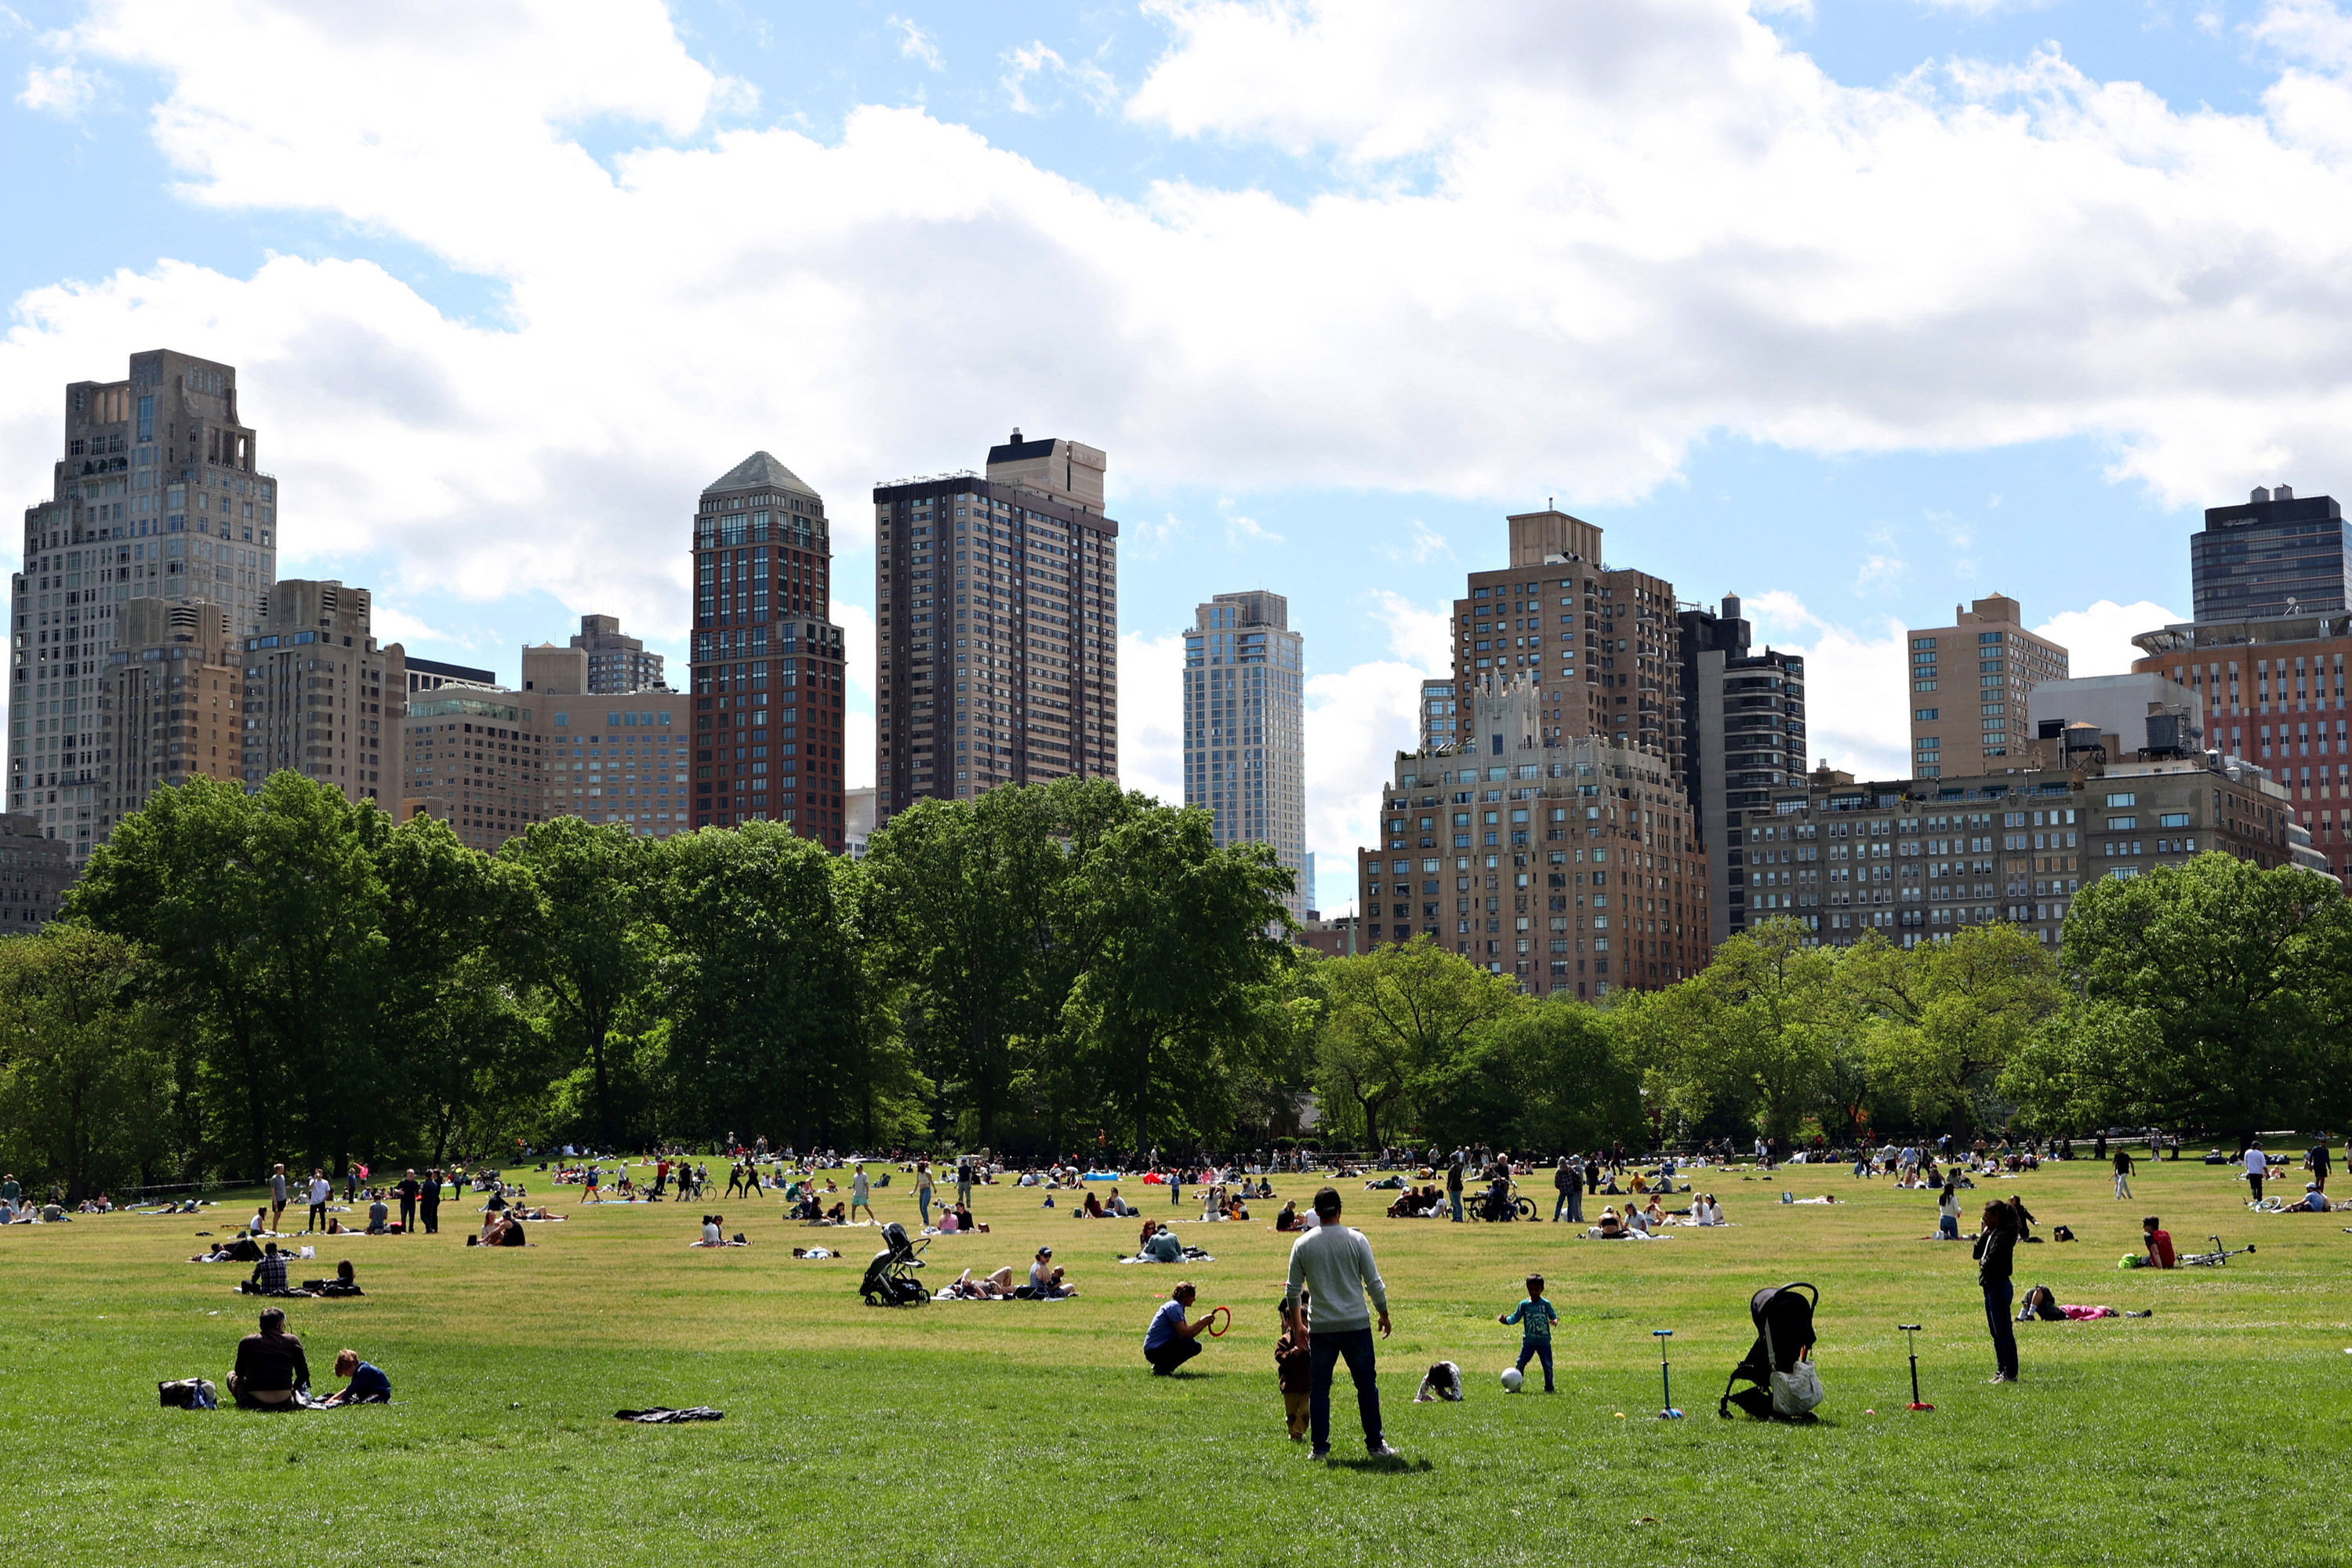 Lots of people in Central Park, New York playing games and relaxing while looking at the Midtown skyline